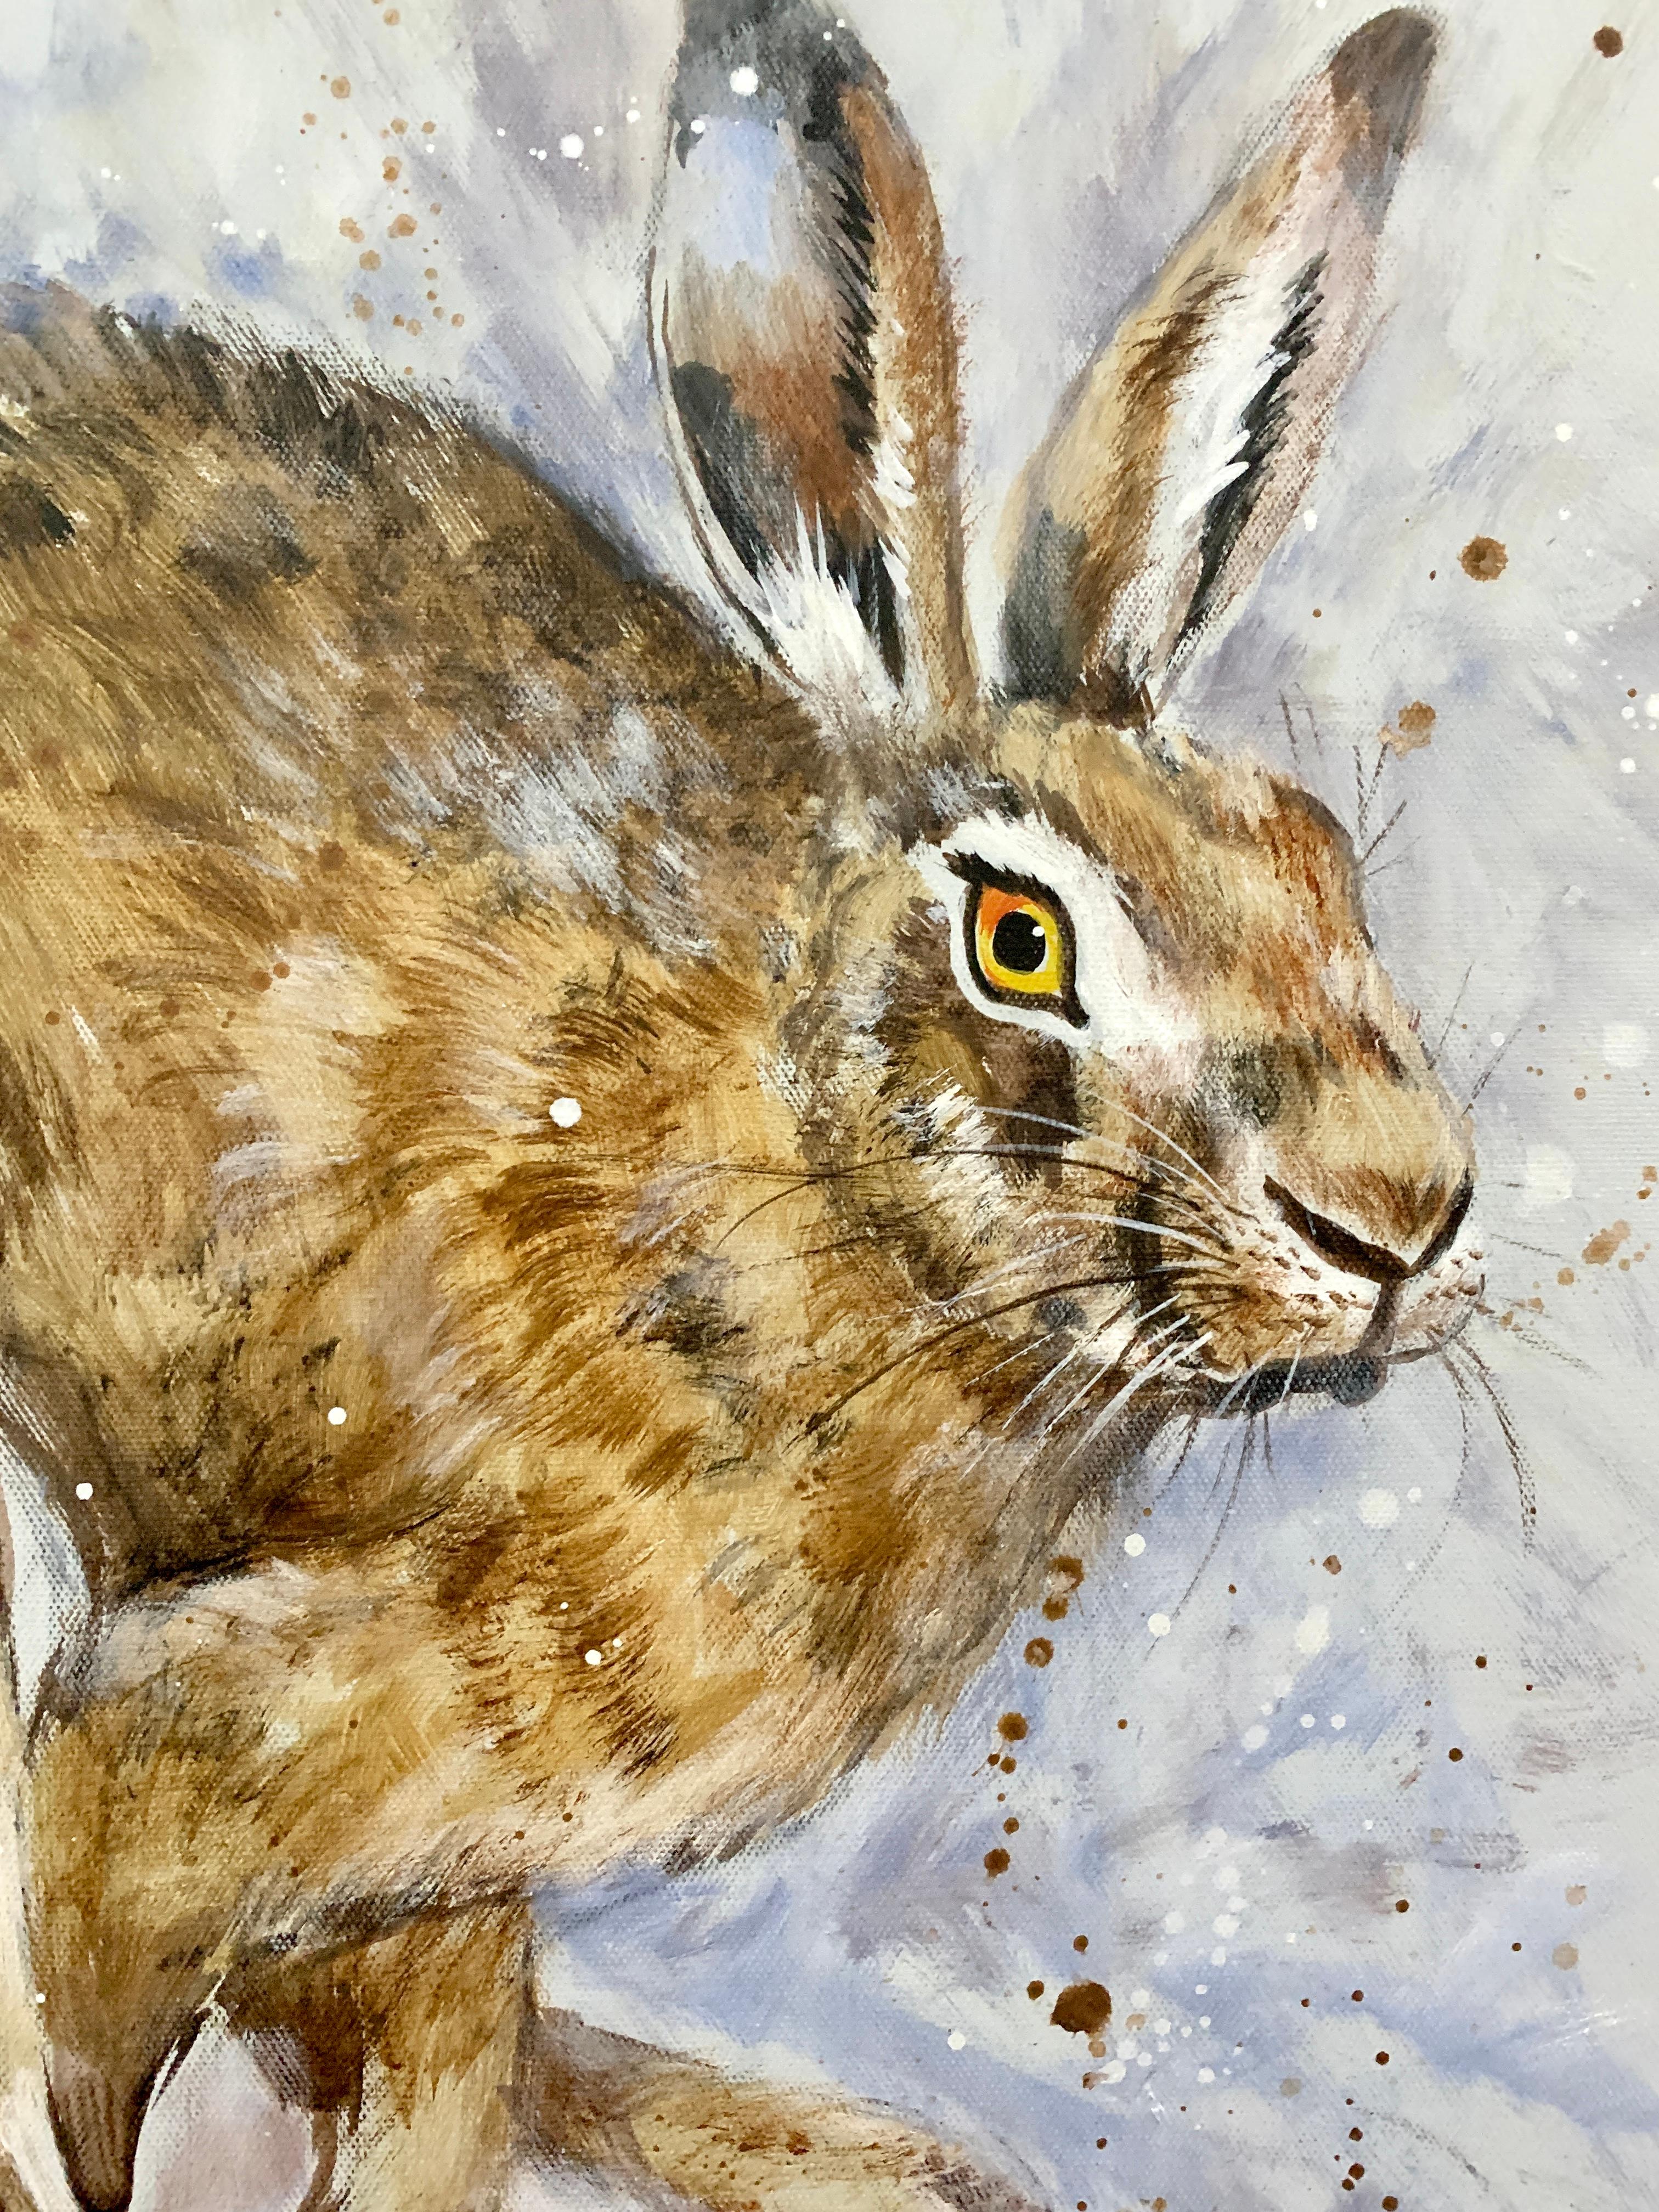 20th century English, fun oil on canvas portrait of a running or jumping Hare - Painting by Ryan